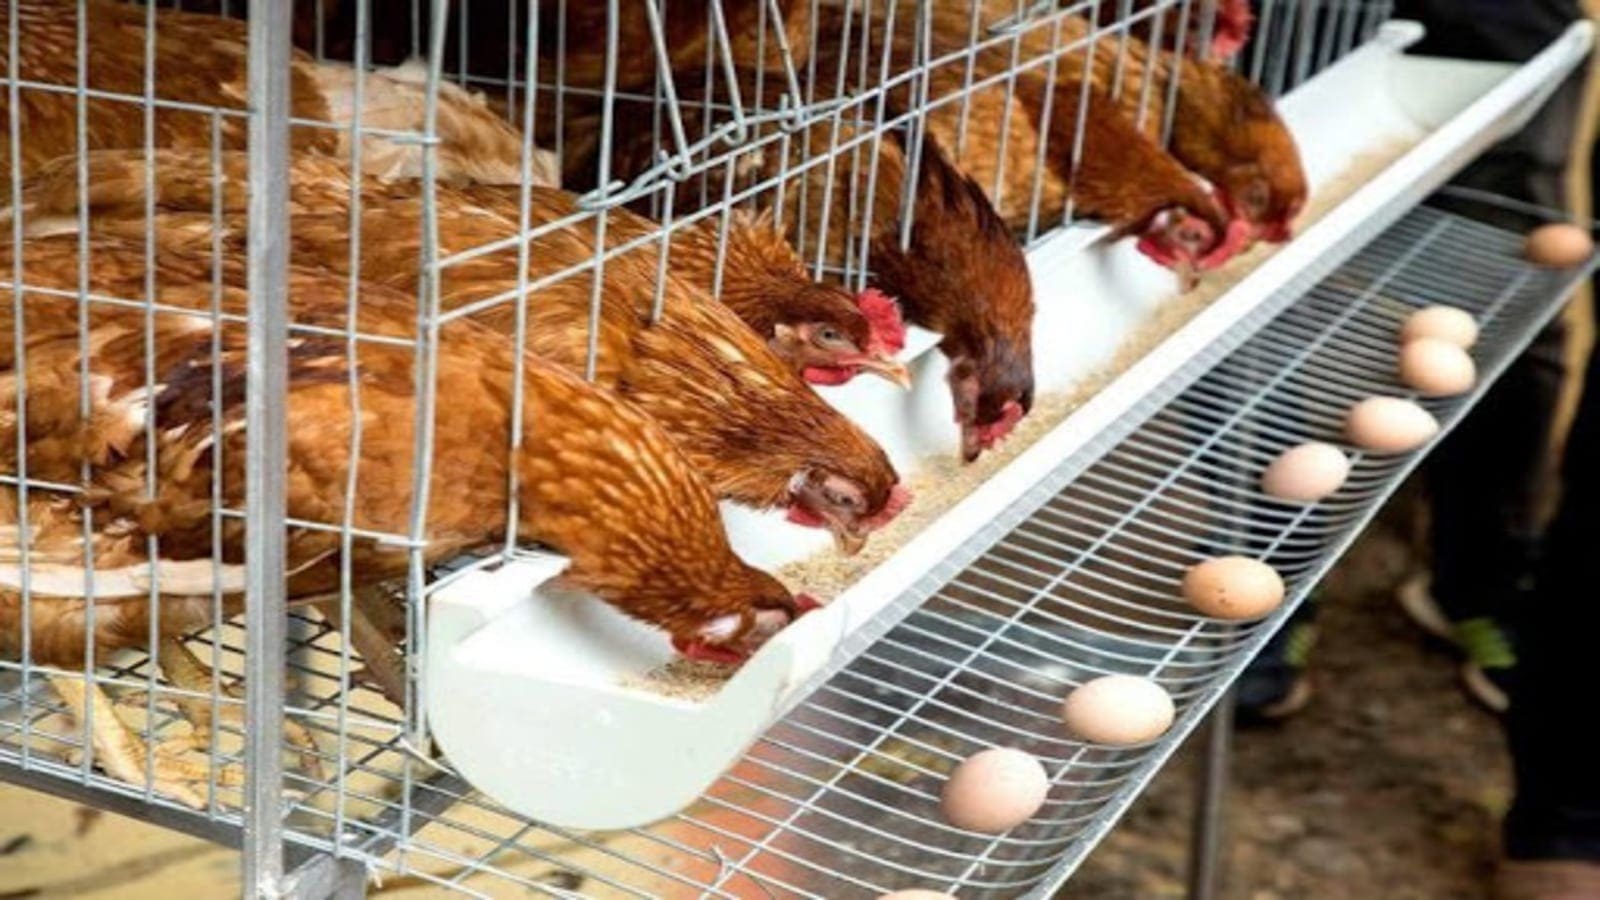 Nigeria’s largest egg producer Premium Poultry powers its facility with renewable energy